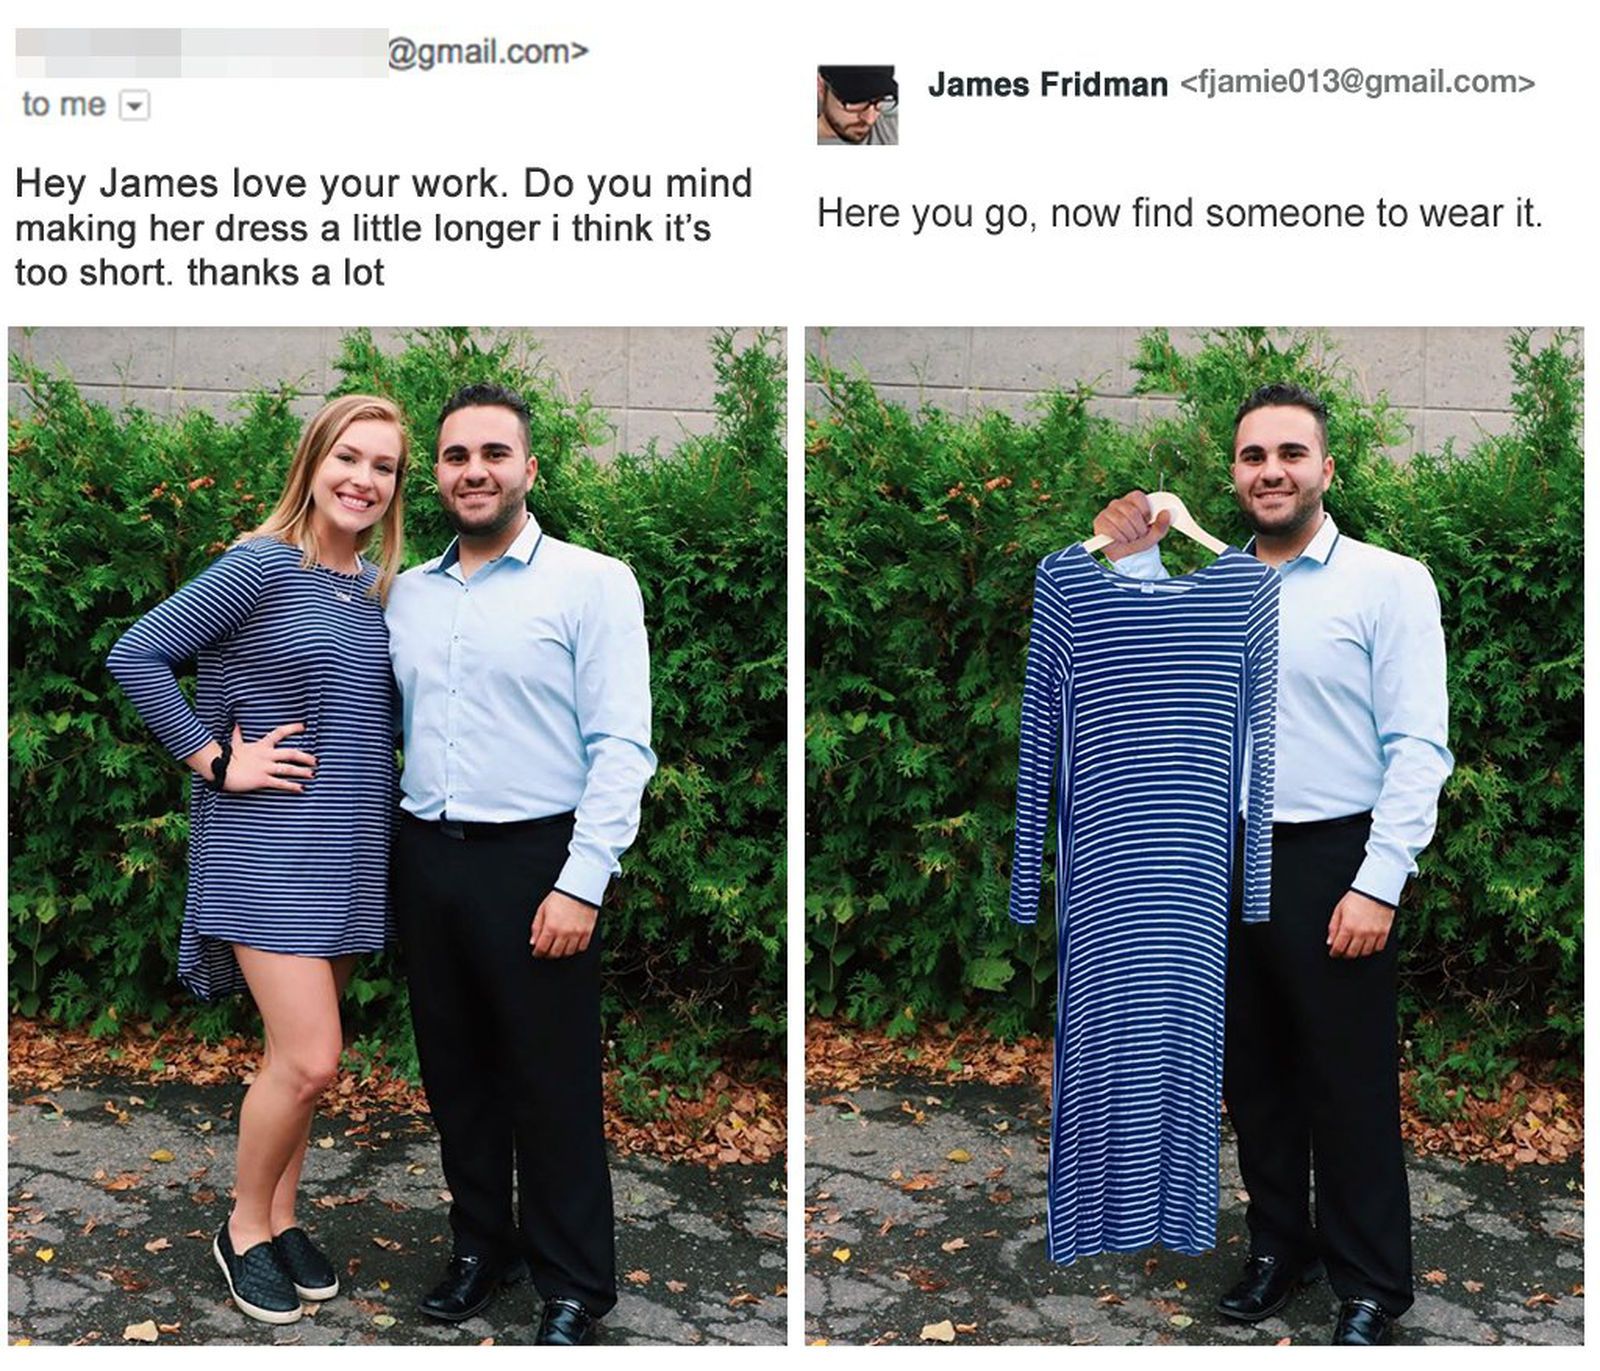 Meet the Photoshop artist you want to be trolled by image 25